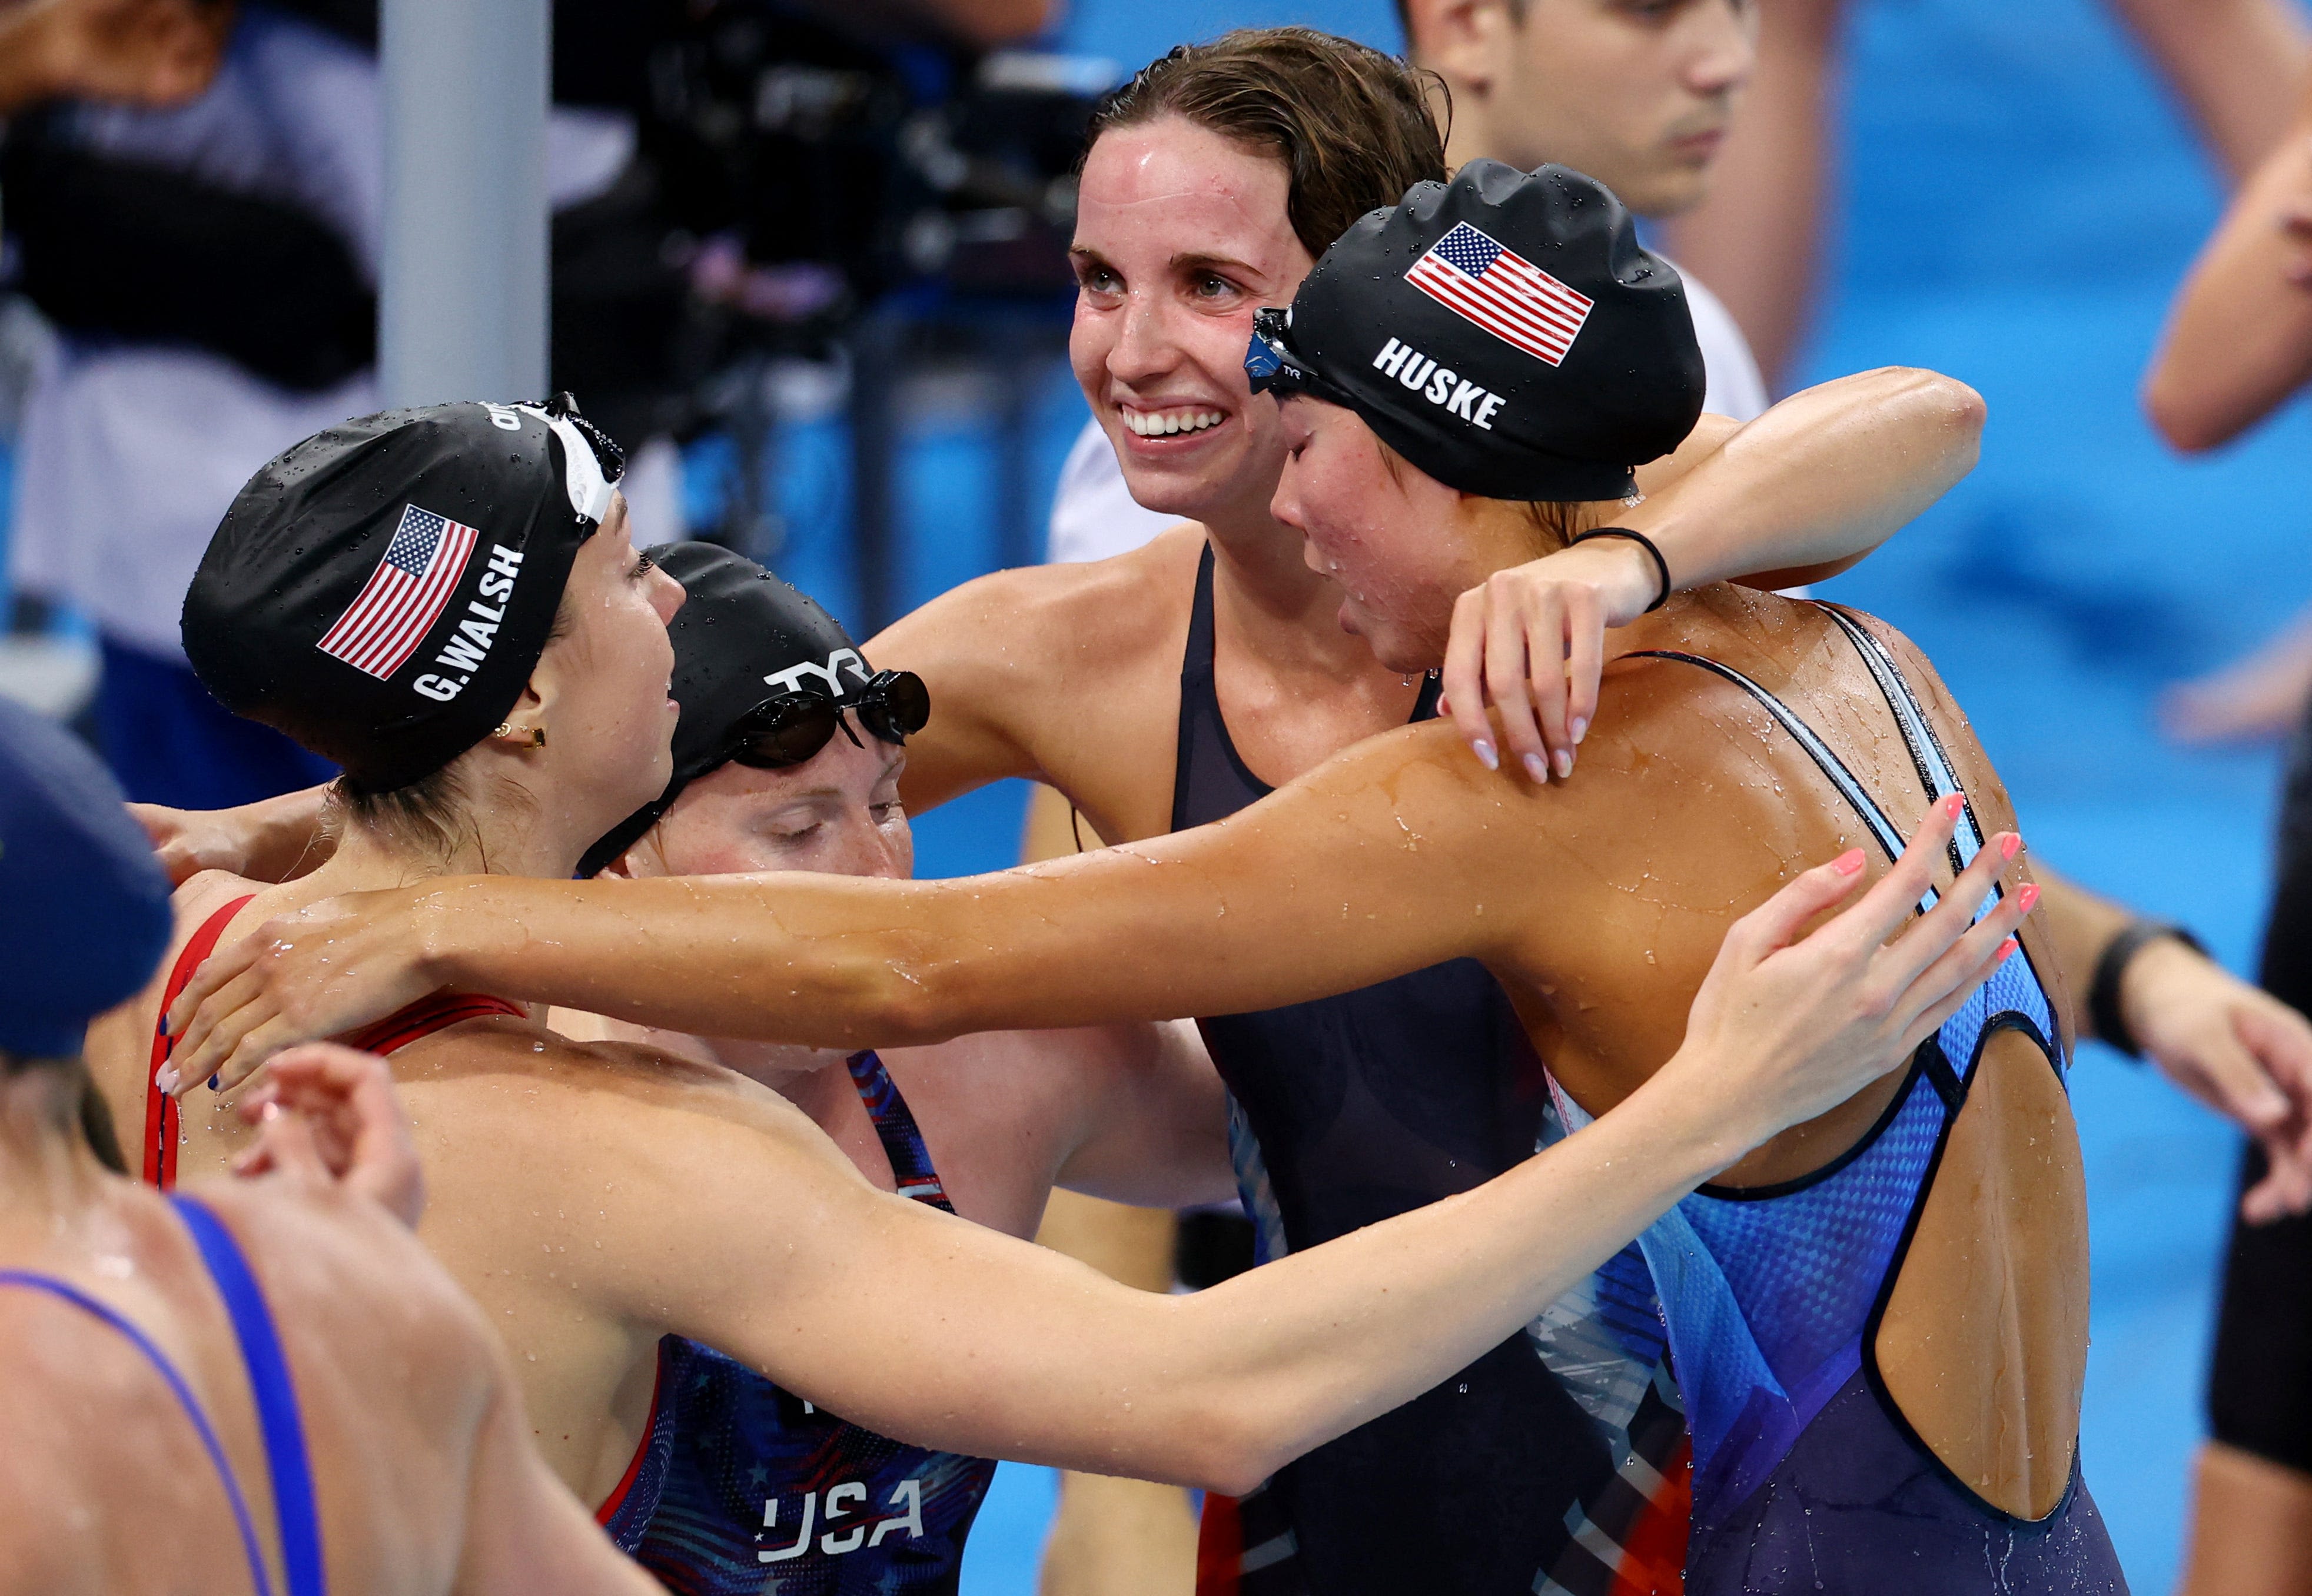 USA breaks world record, wins swimming Olympic gold in women's medley relay